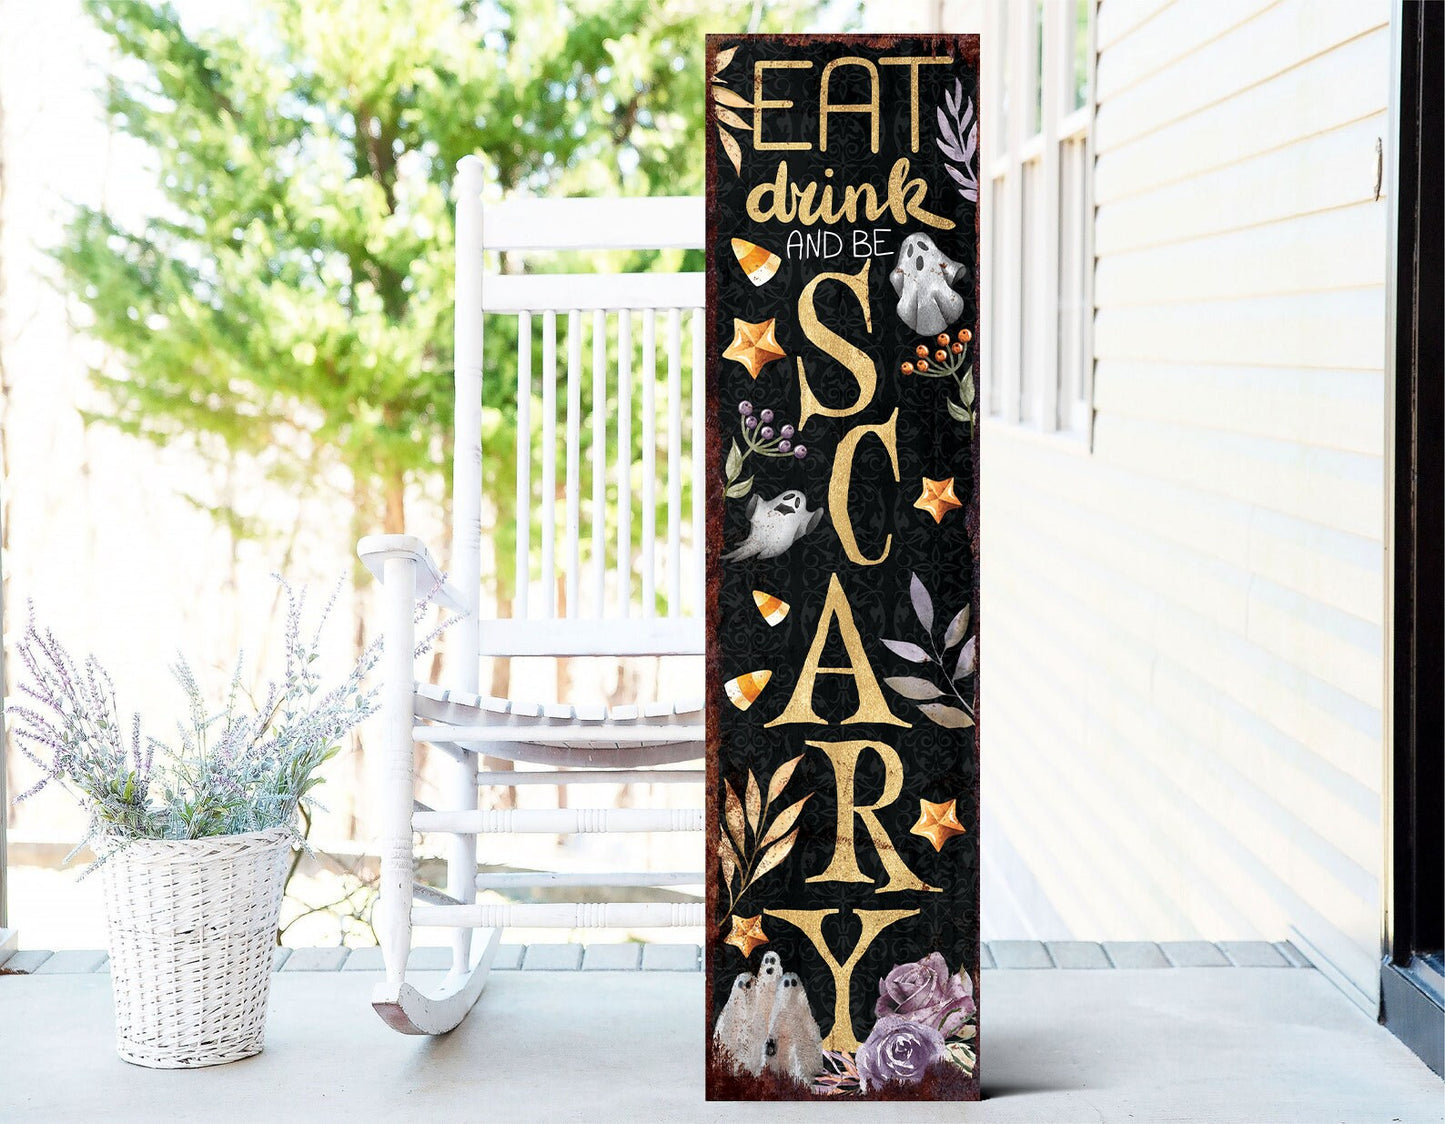 36in Eat, Drink, and Be Scary Halloween Porch Sign - Front Porch Halloween Welcome Sign, Rustic Modern Farmhouse Entryway Board